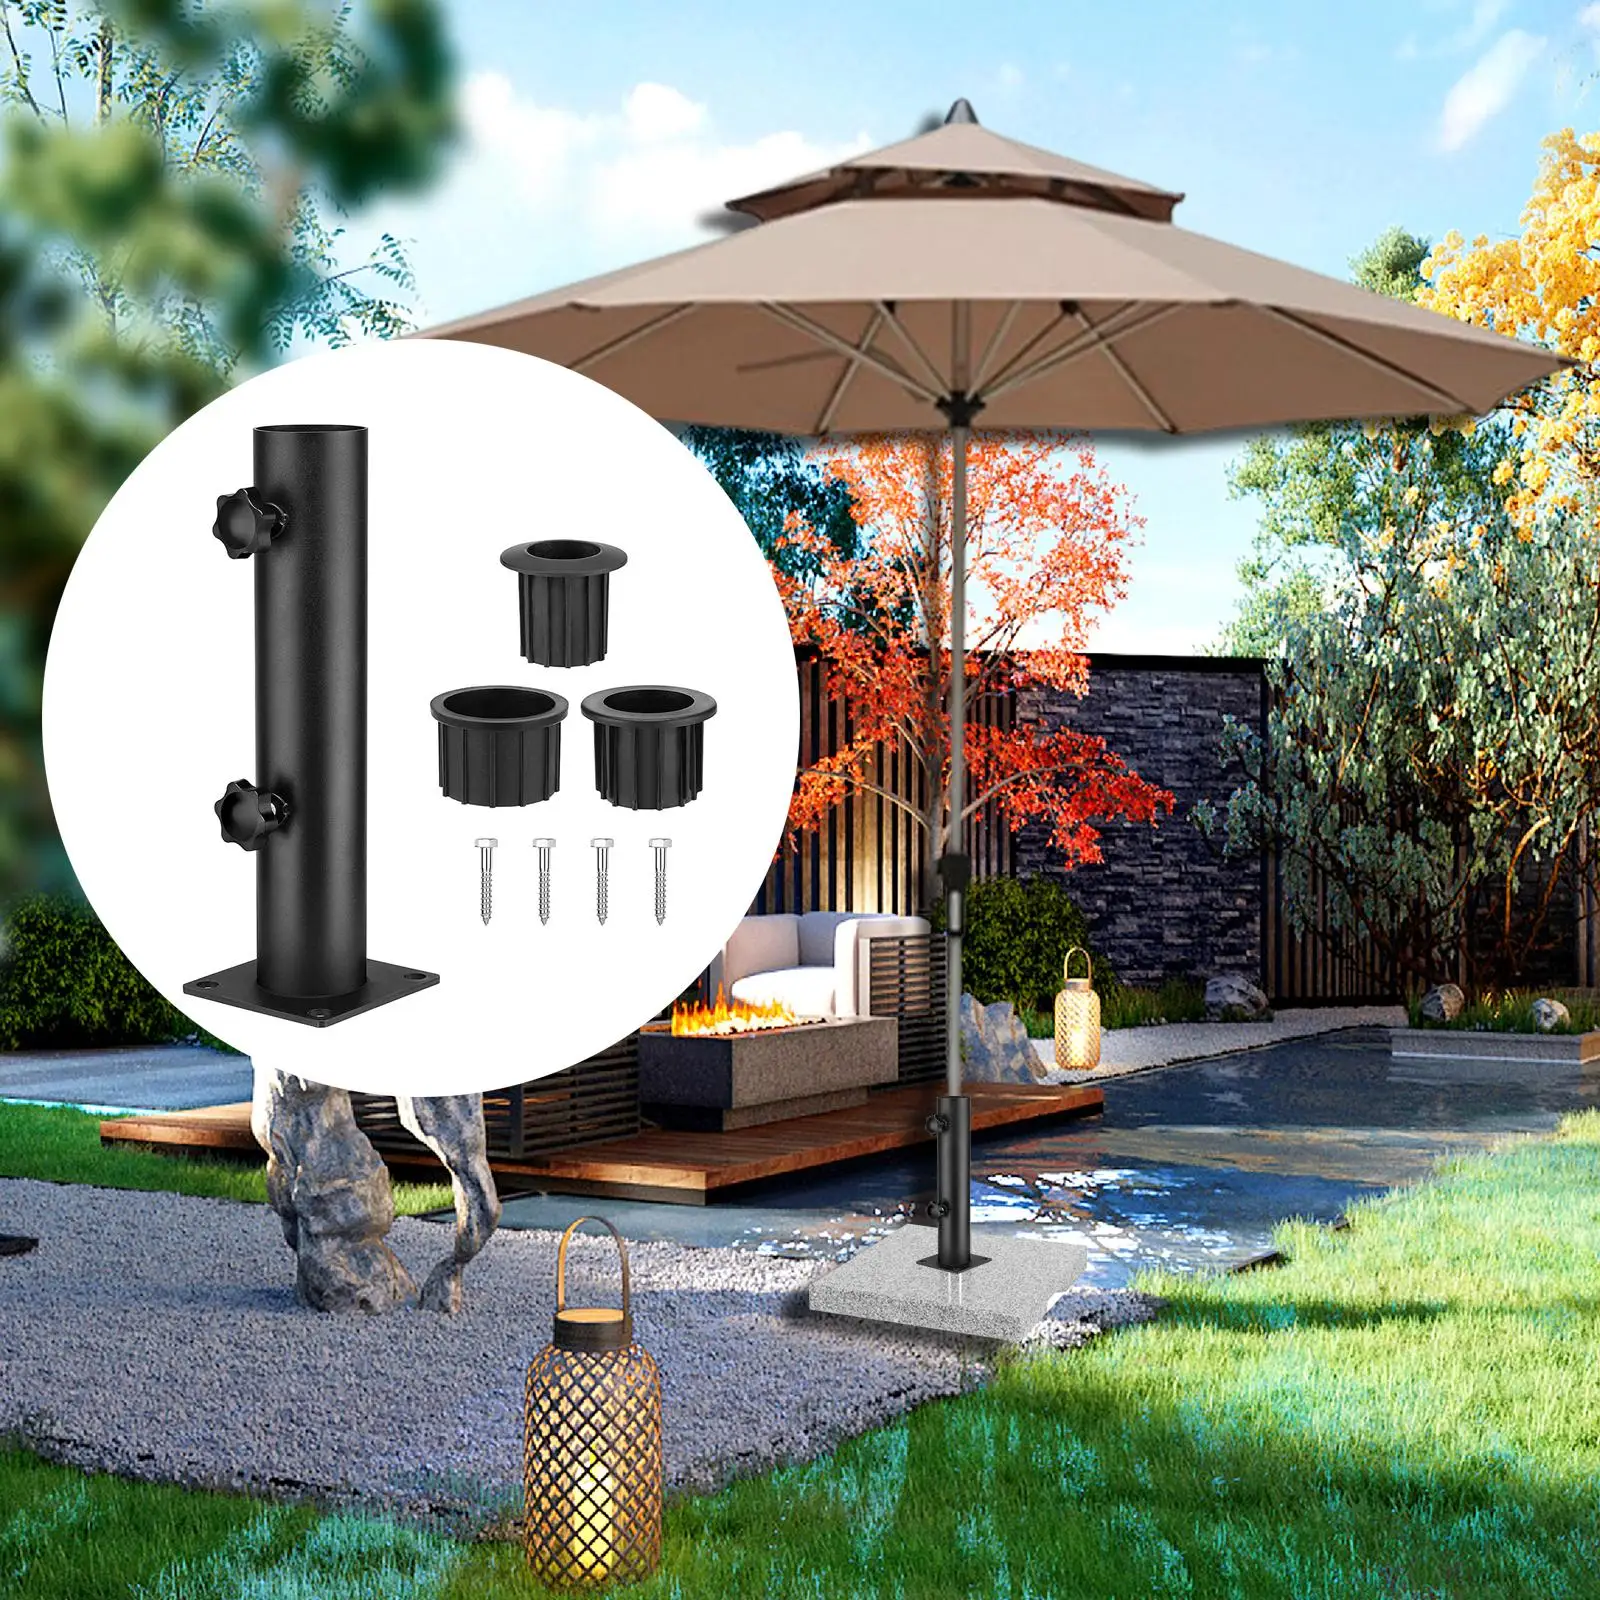 Umbrella Base Stand Fits 6cm Post Marble Flag Pole Holder Pole Holder Sun Shelter Deck for Lawn Garden Outdoor Outside Balcony